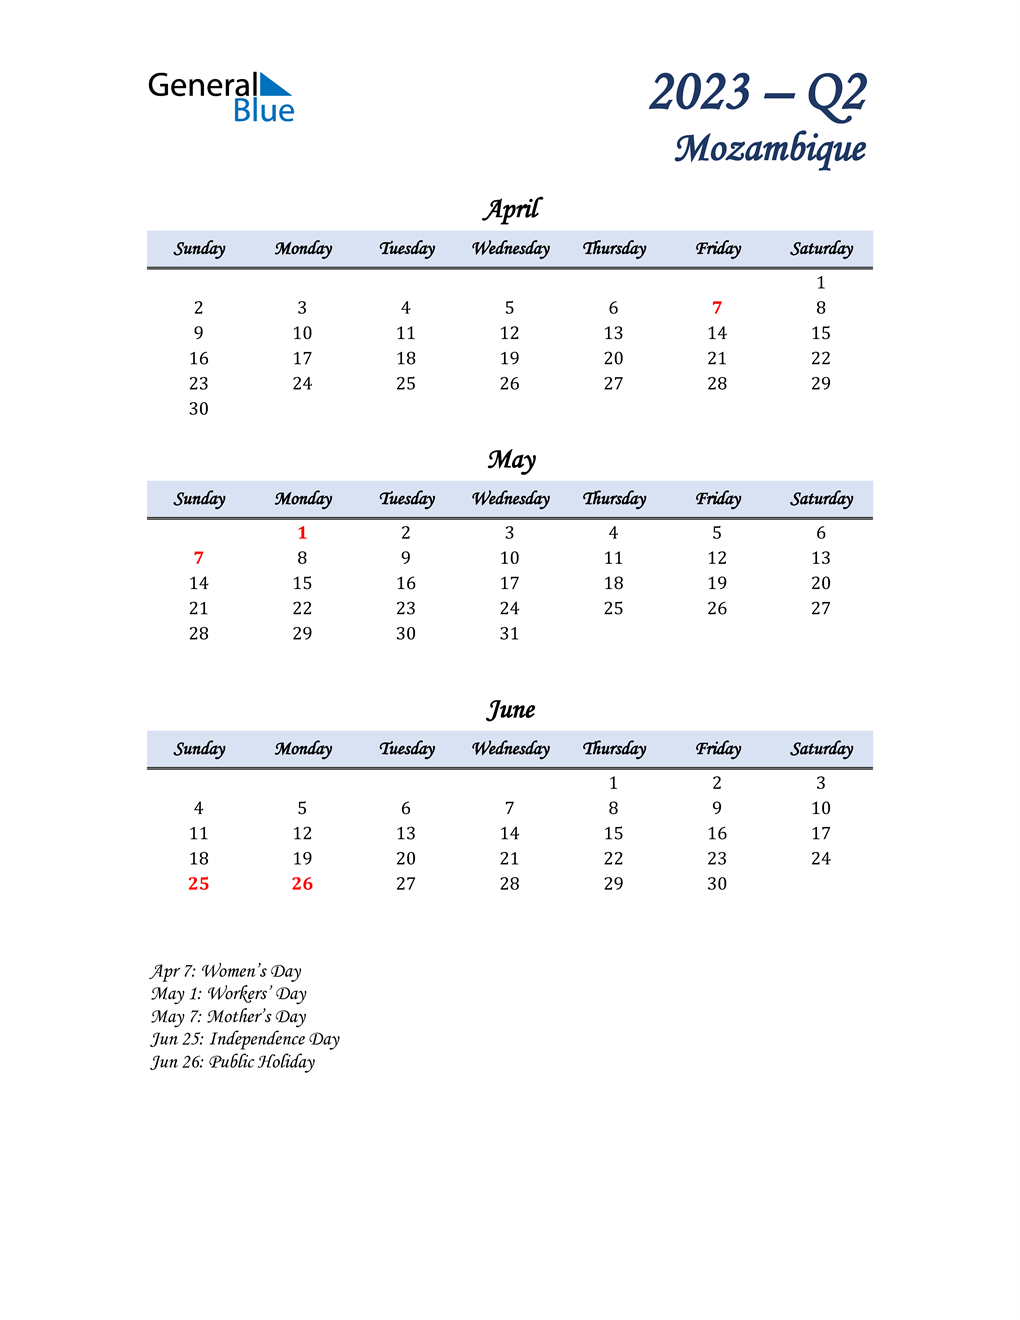  April, May, and June Calendar for Mozambique